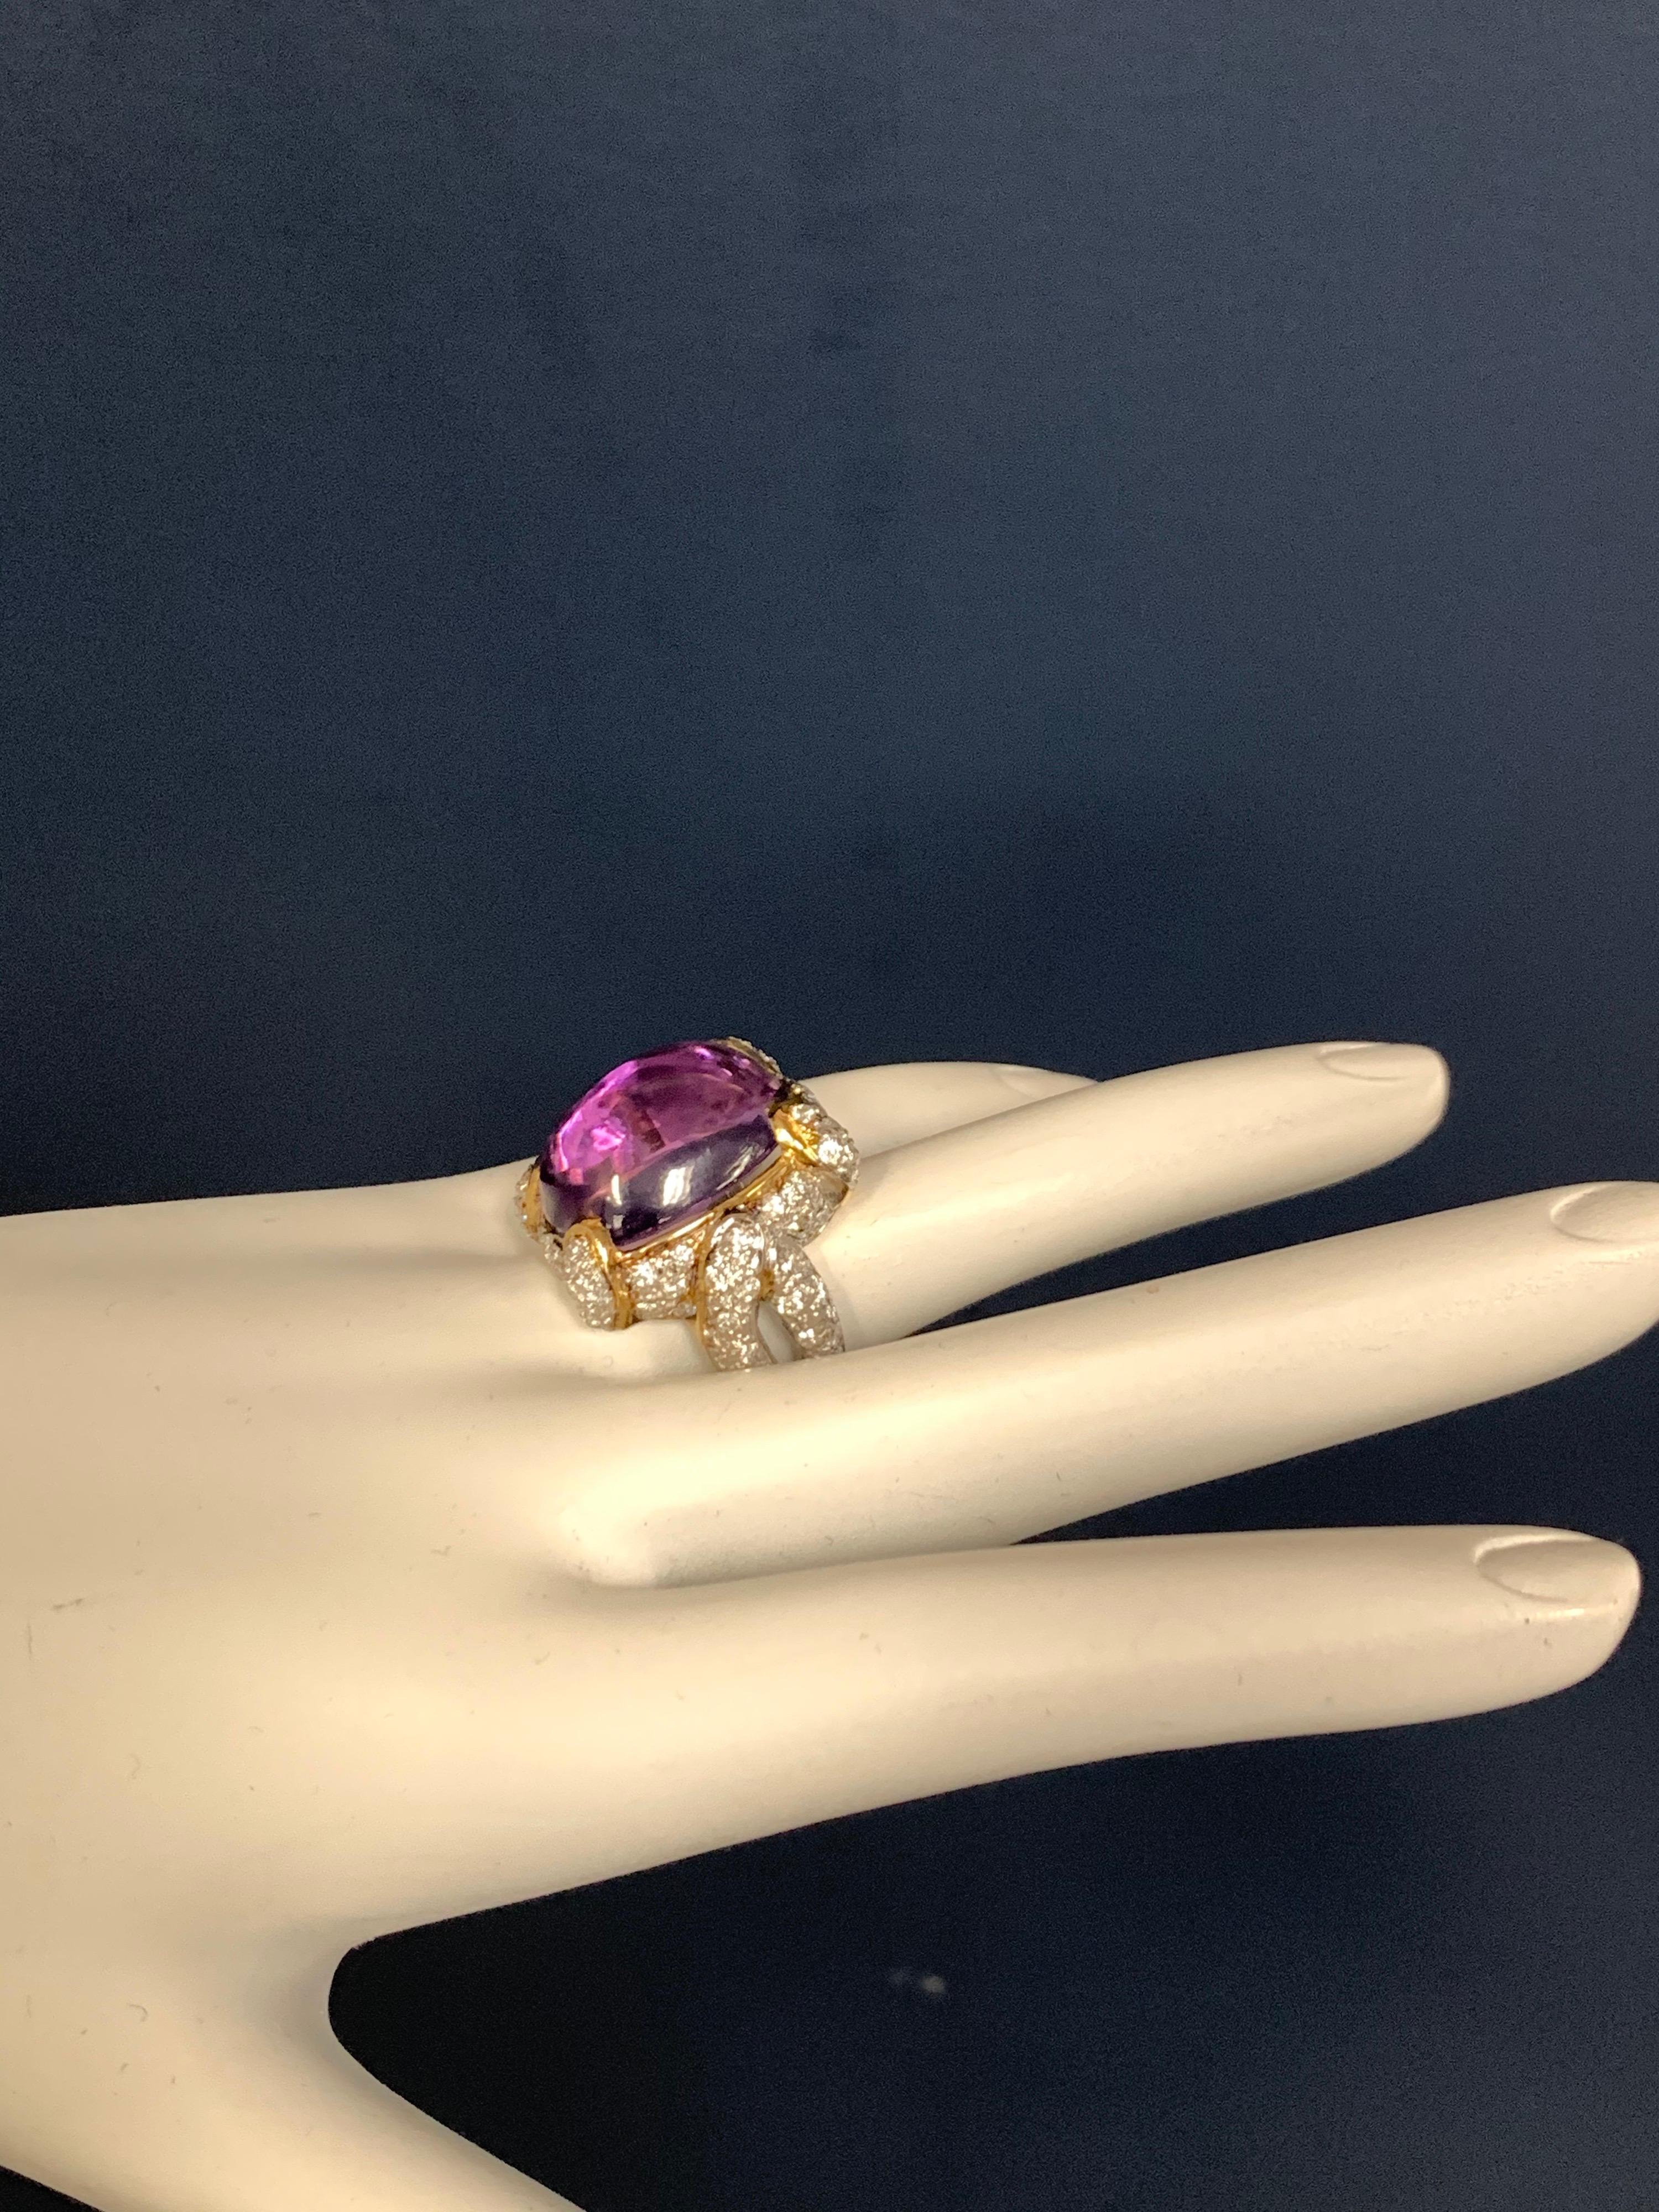 21.68 Carat Retro Gold Cocktail Ring Natural Diamond and Cab Amethyst circa 1960 For Sale 1